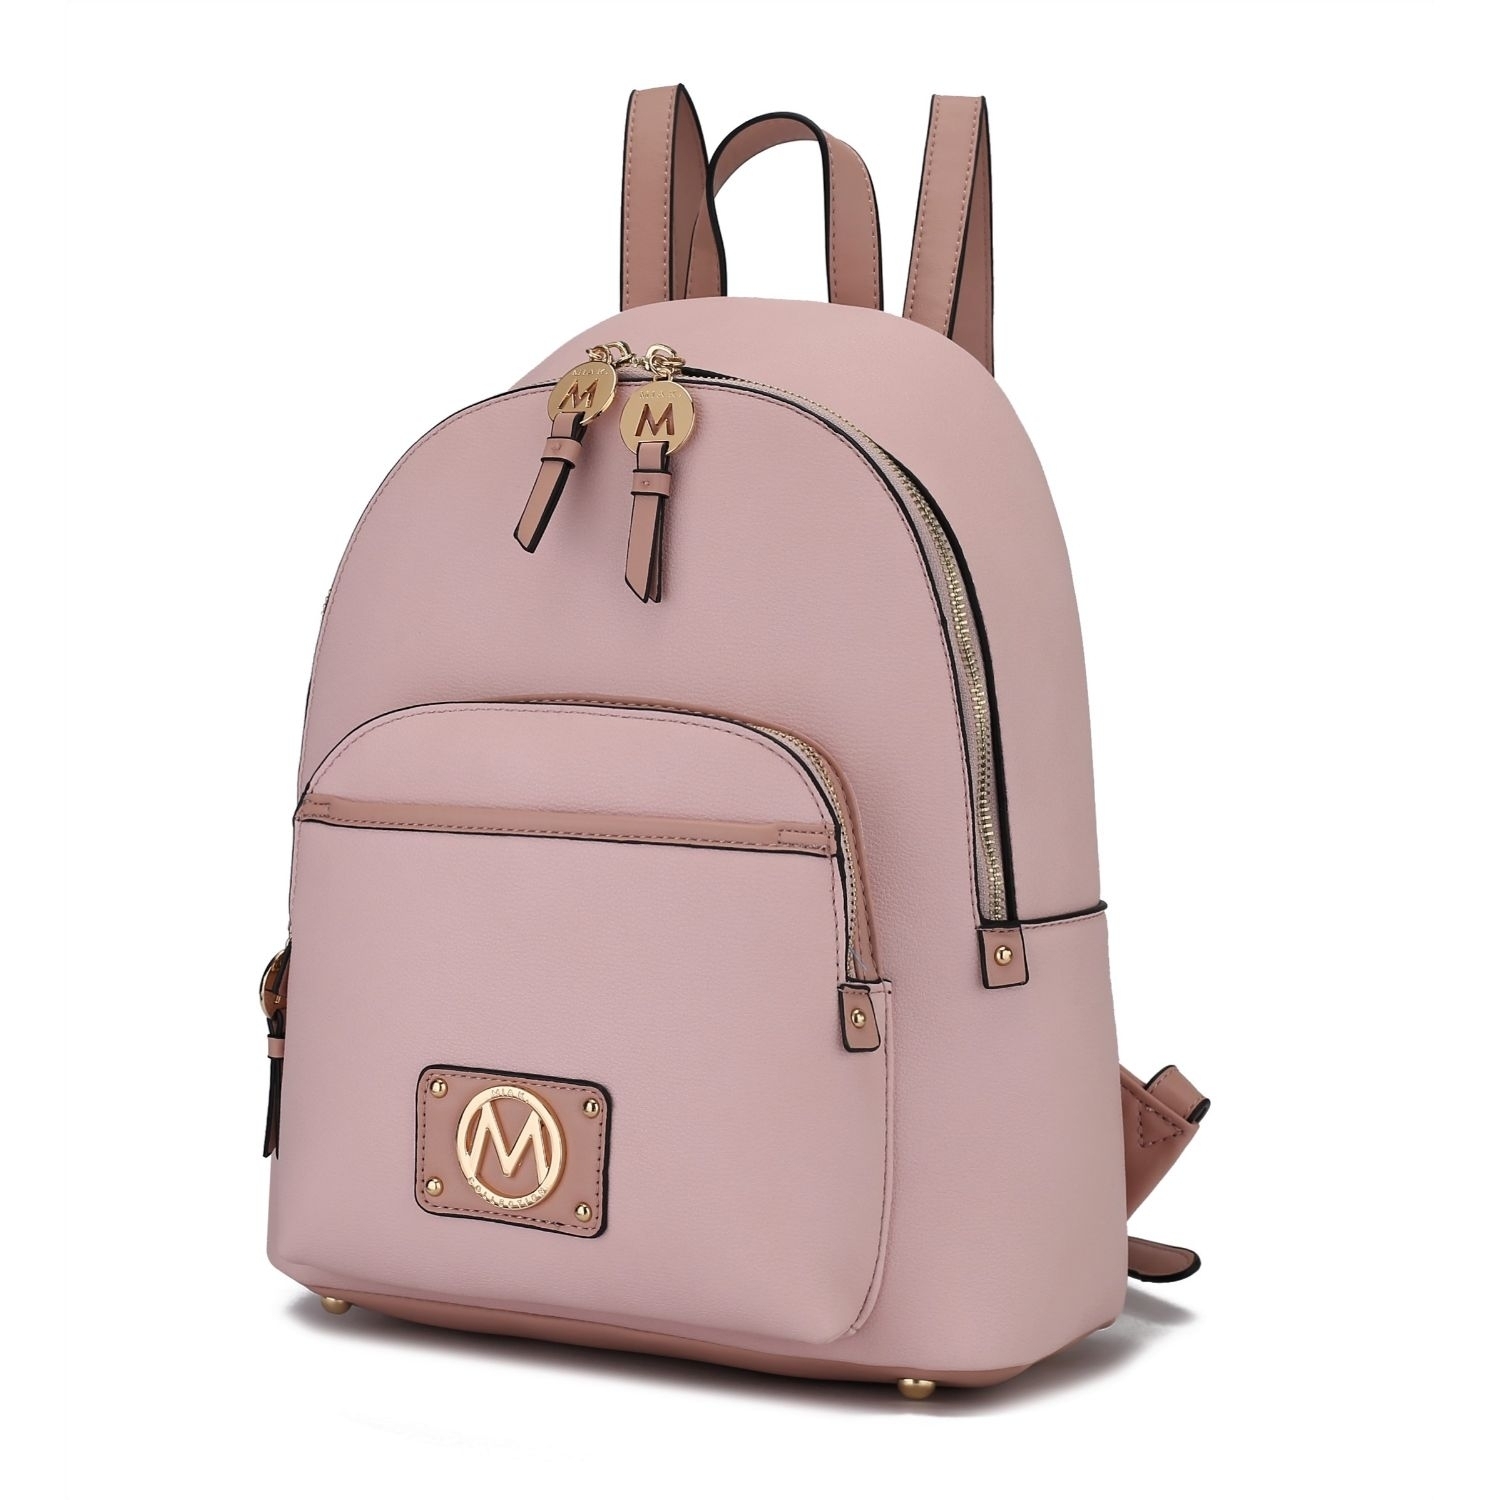 MKF Collection Alice Backpack By Mia K. - Pewter